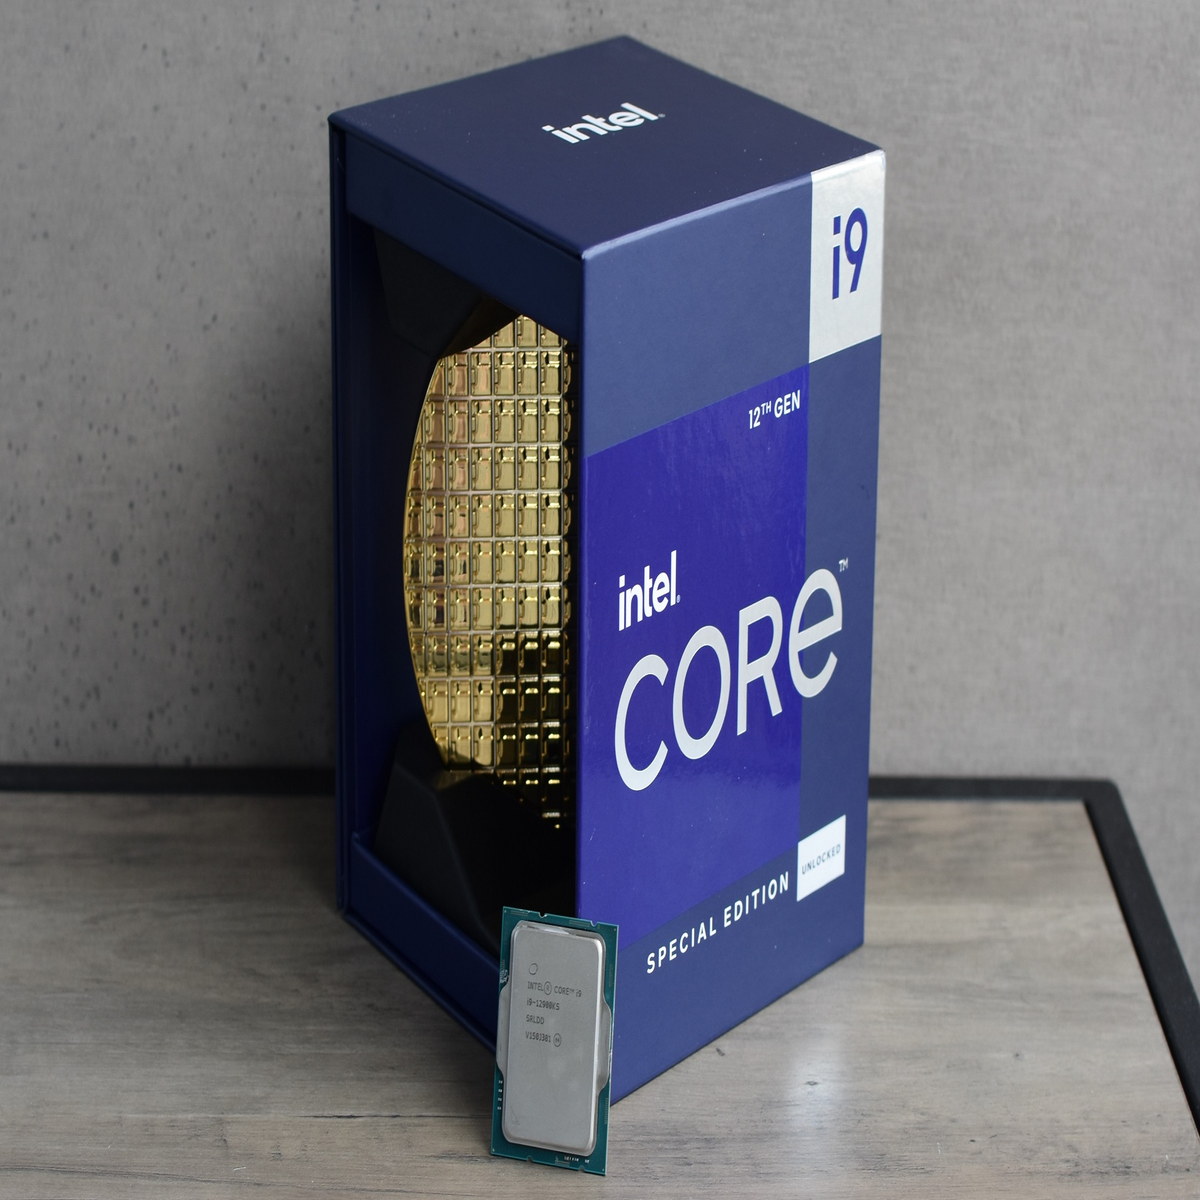 Intel Core i9-12900KS review: Intel's fastest gaming CPU yet